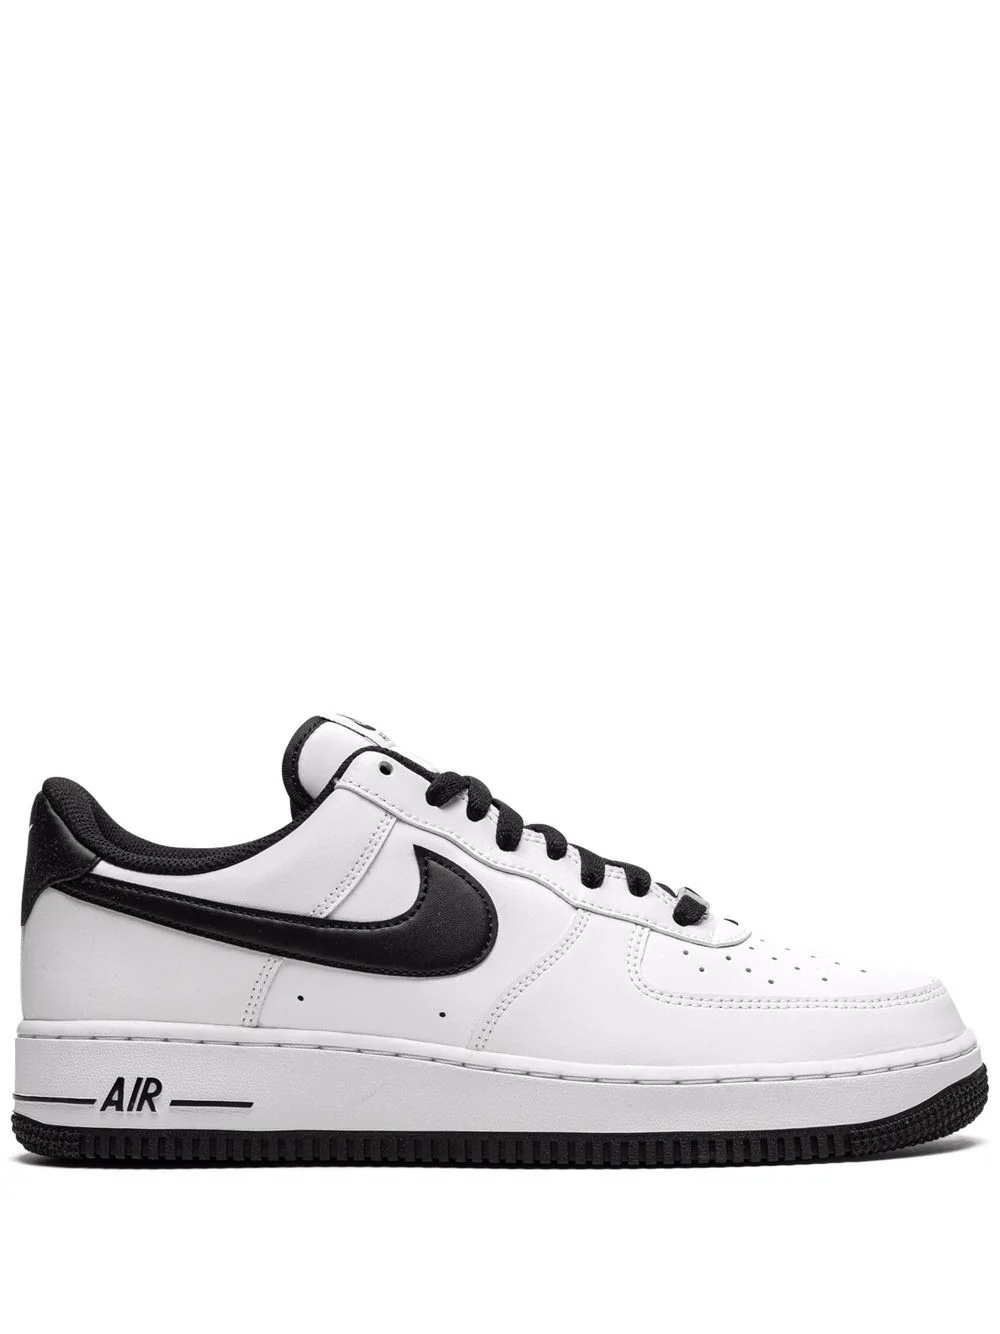 Air Force 1 '07 "White/Black" sneakers - 1